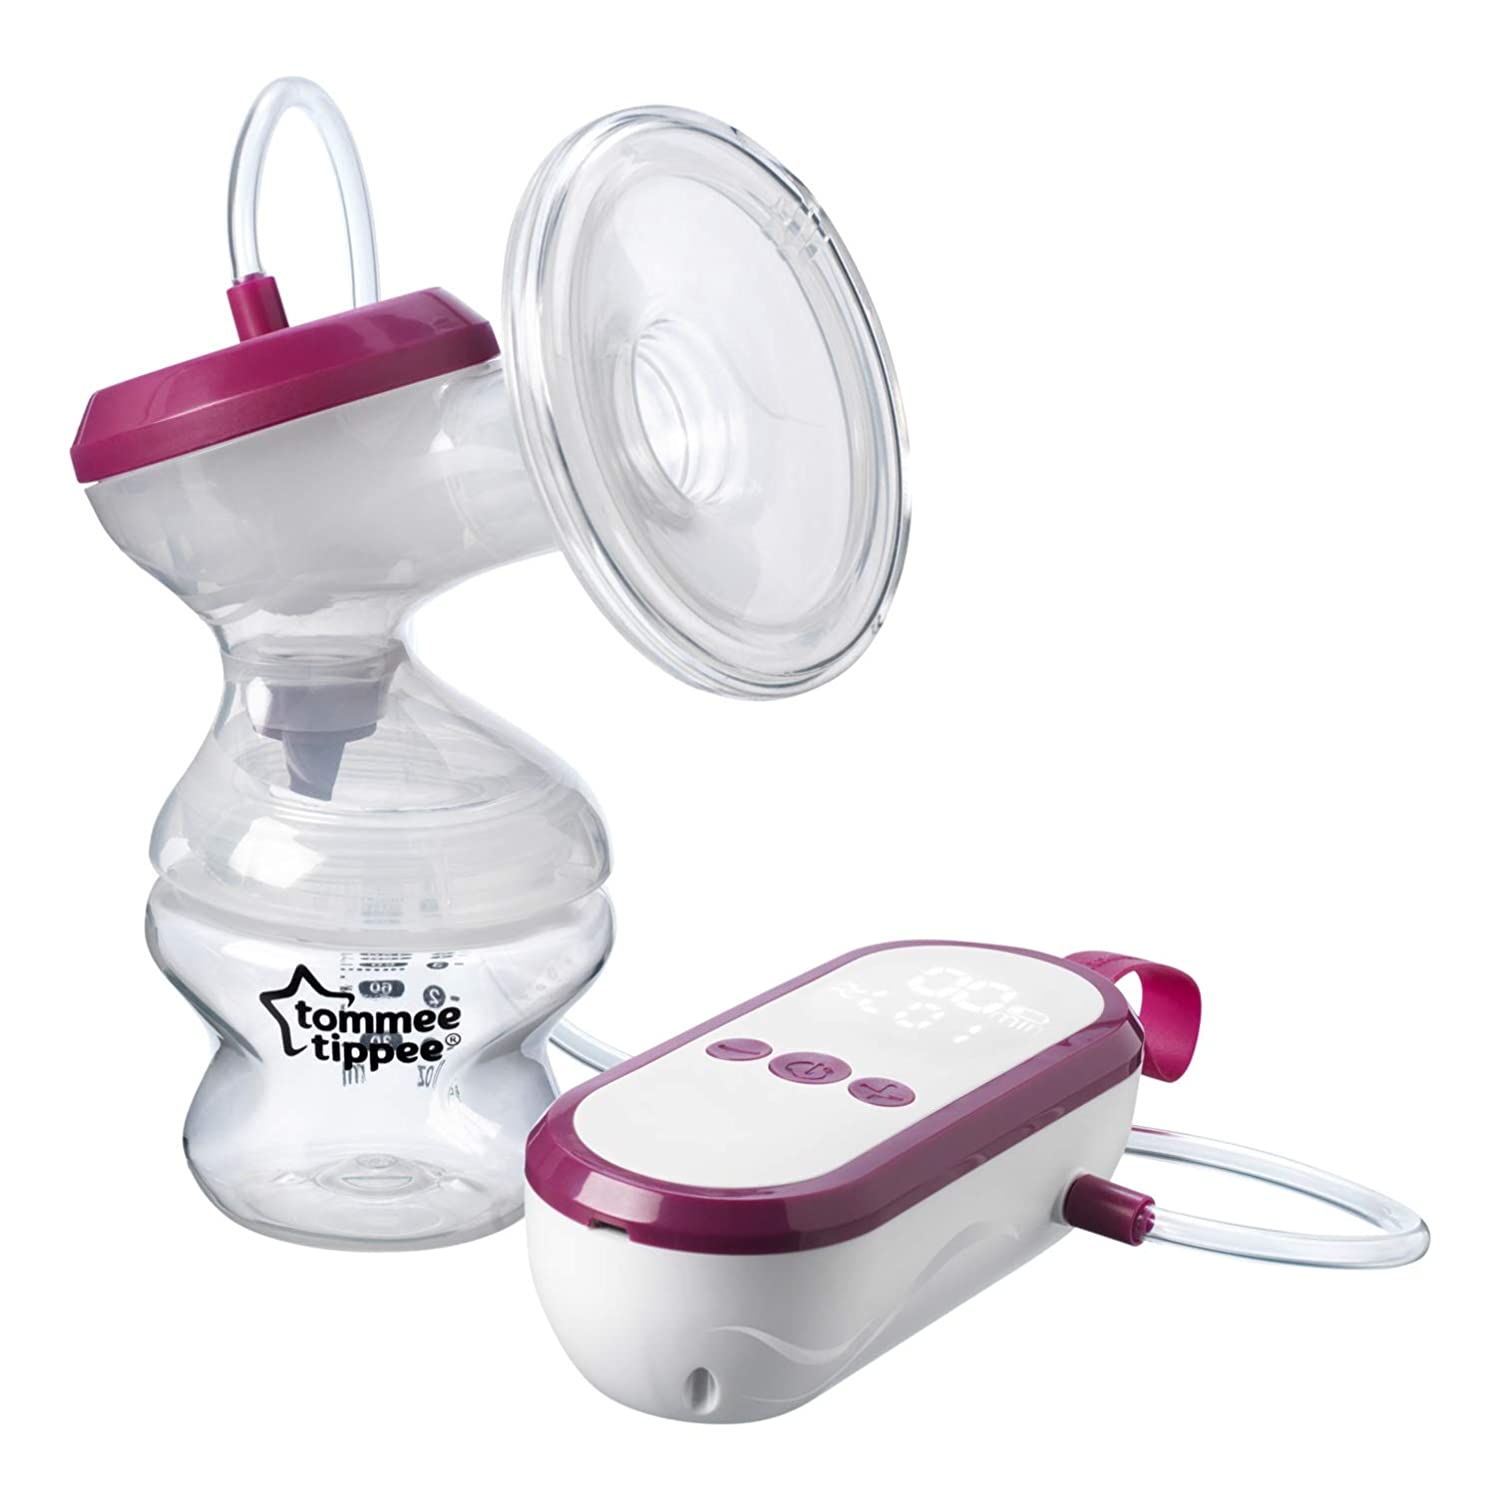 tommee-tippee-electric-pump